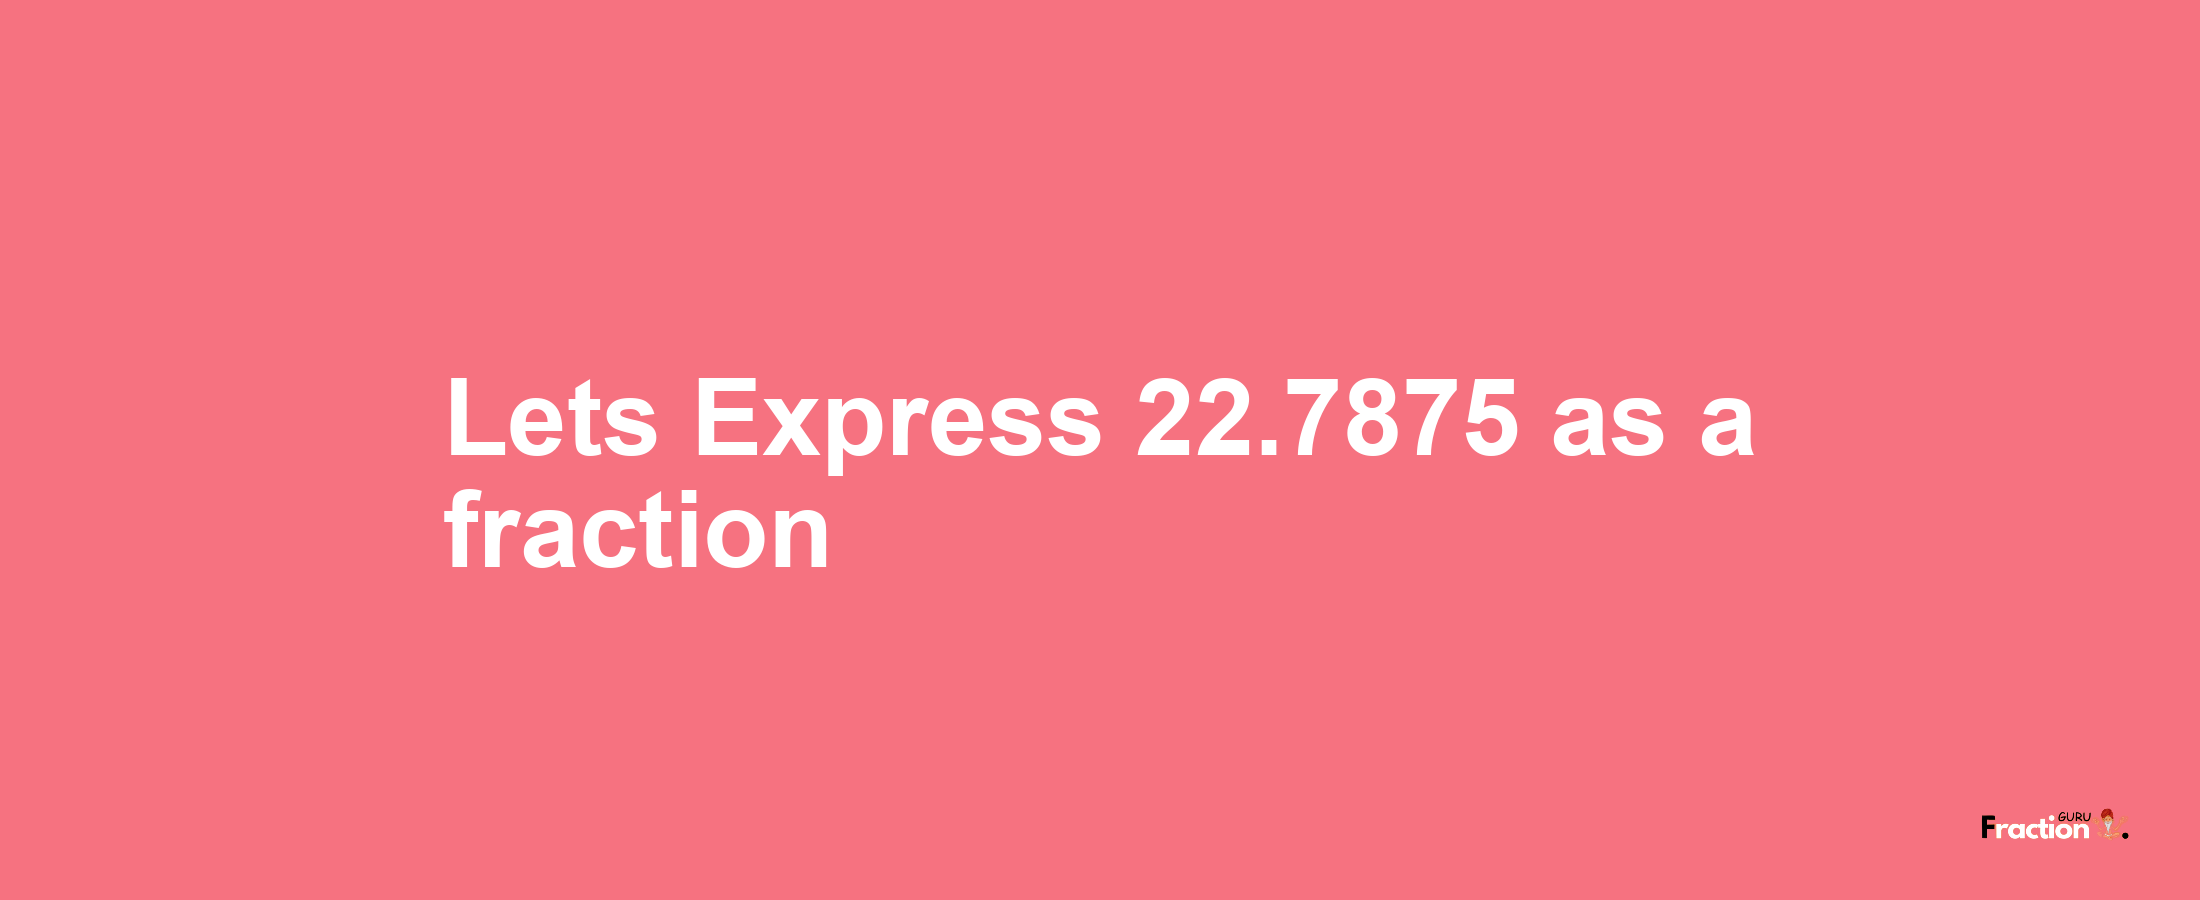 Lets Express 22.7875 as afraction